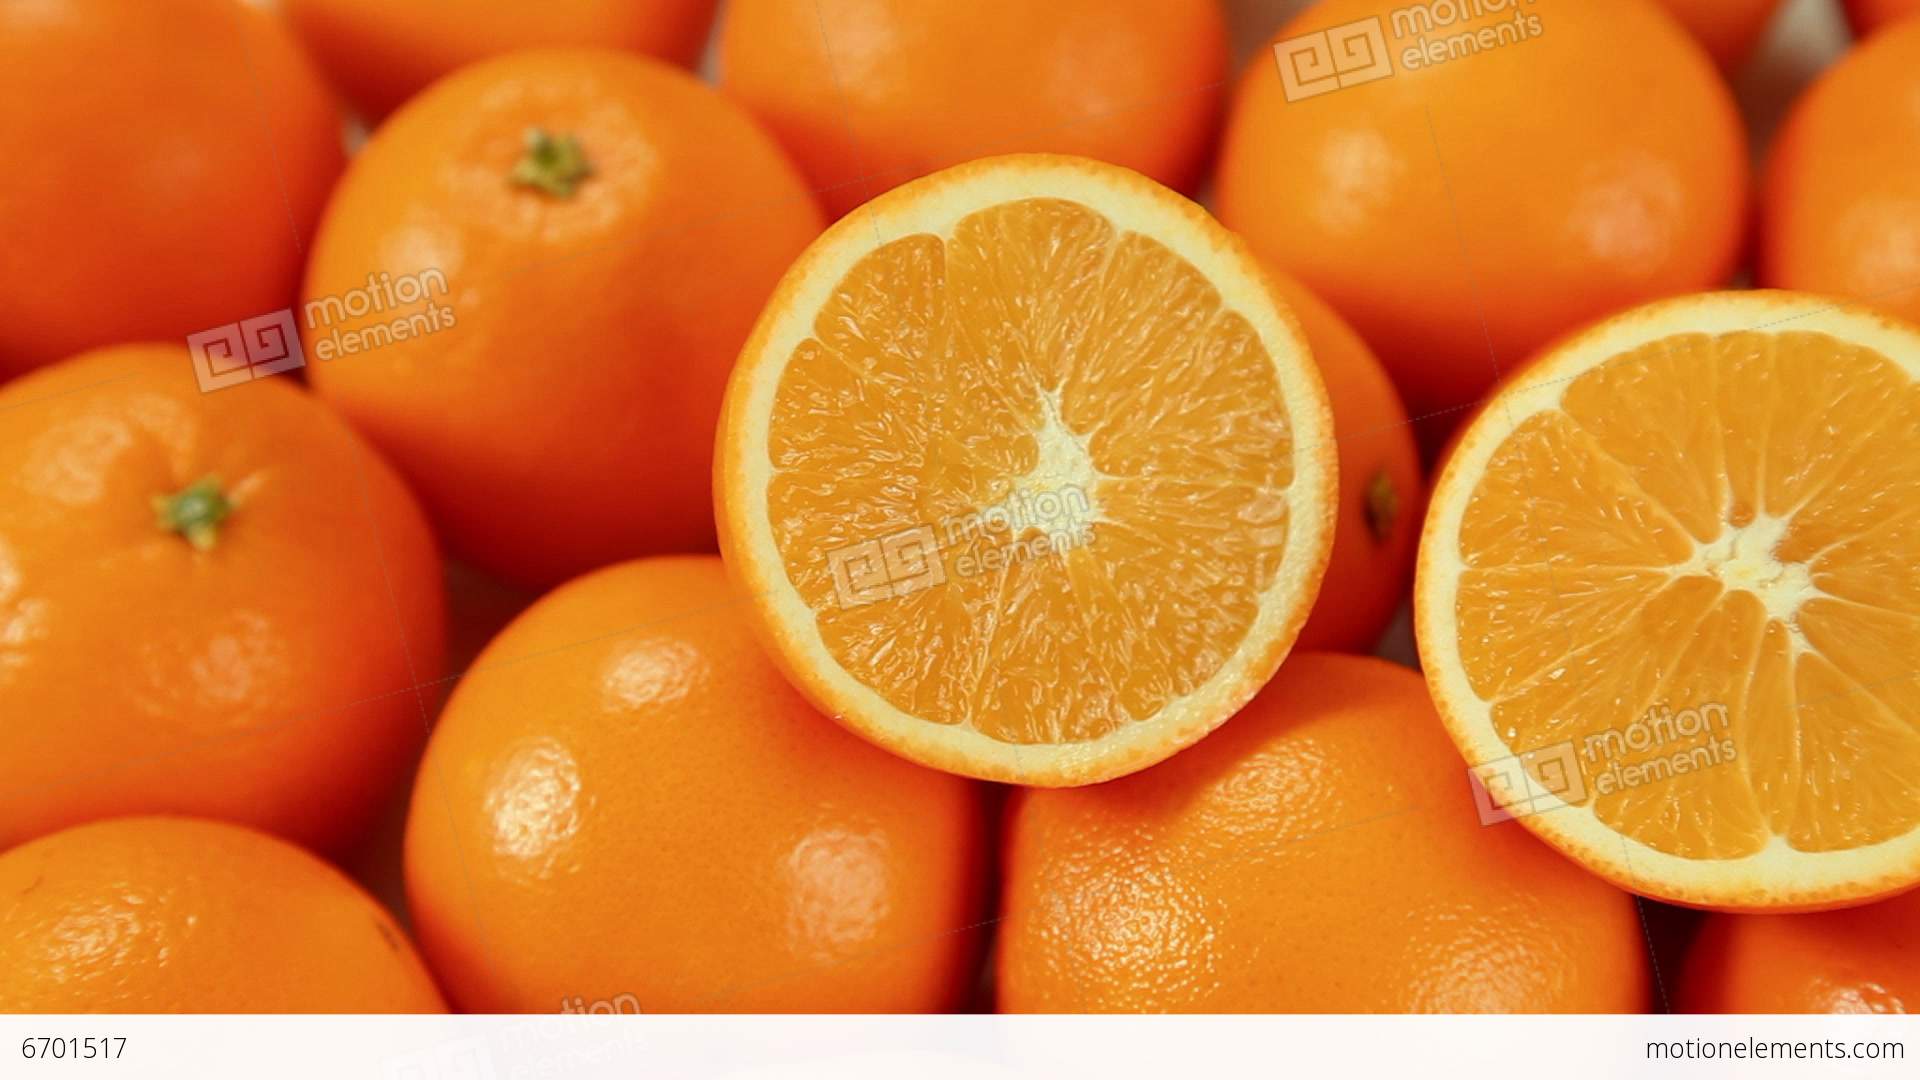 Beautiful Oranges Fruits Stock video footage | 6701517